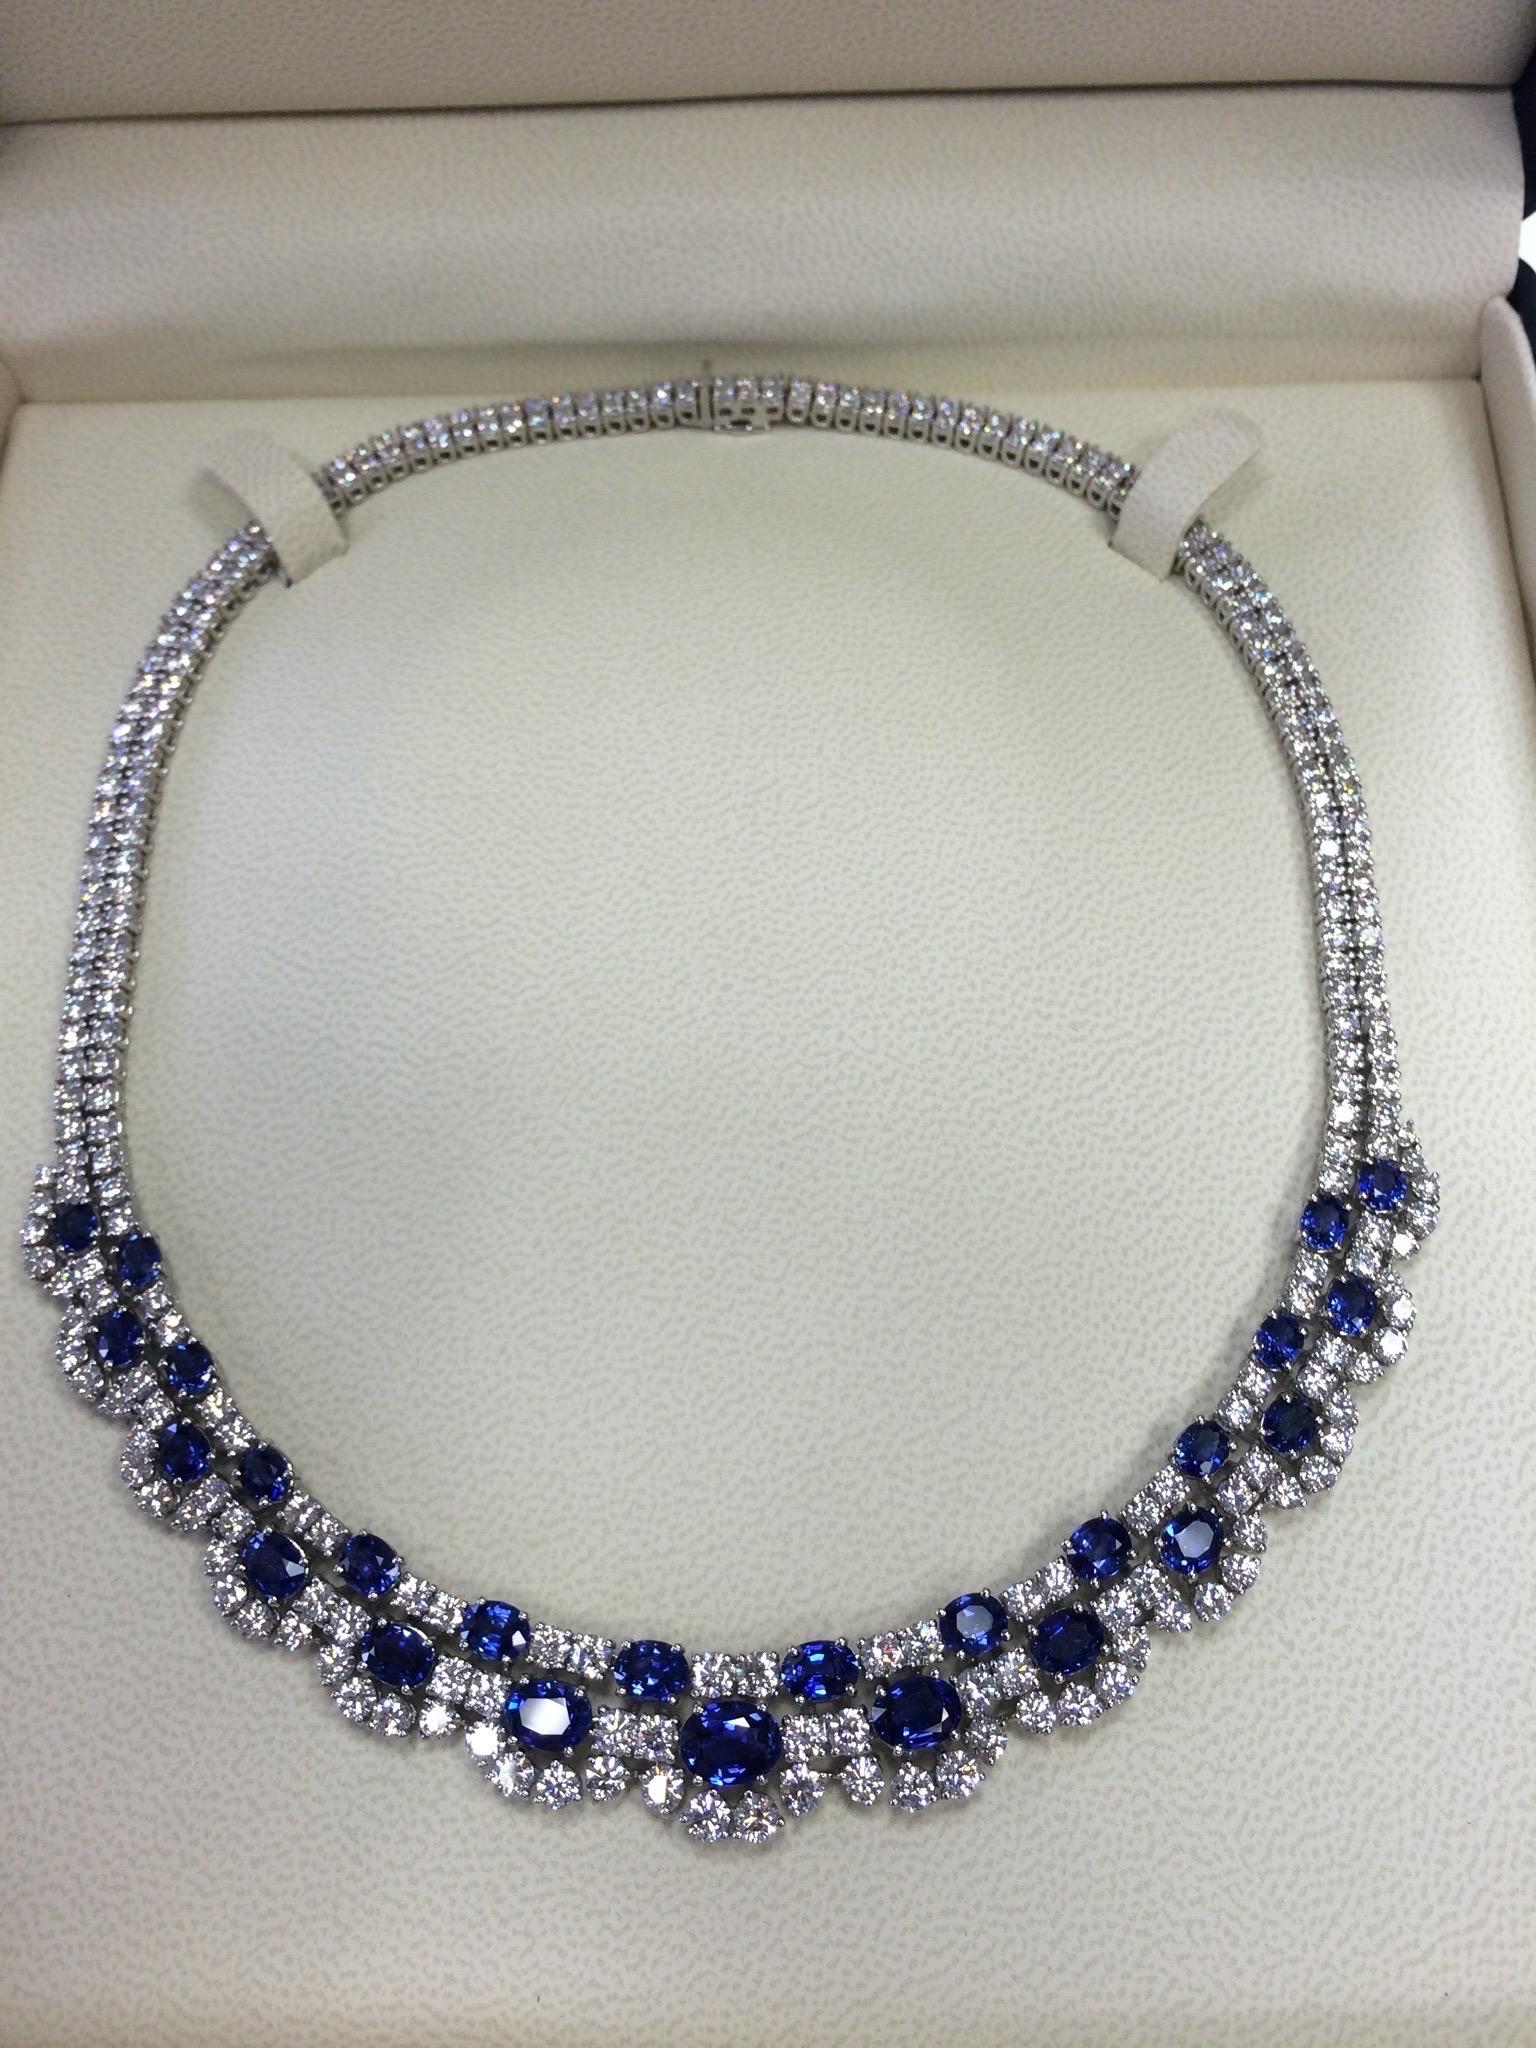 Women's Modern Gold 37 Carat Natural Colorless Diamond & Blue Sapphire Italian Necklace For Sale